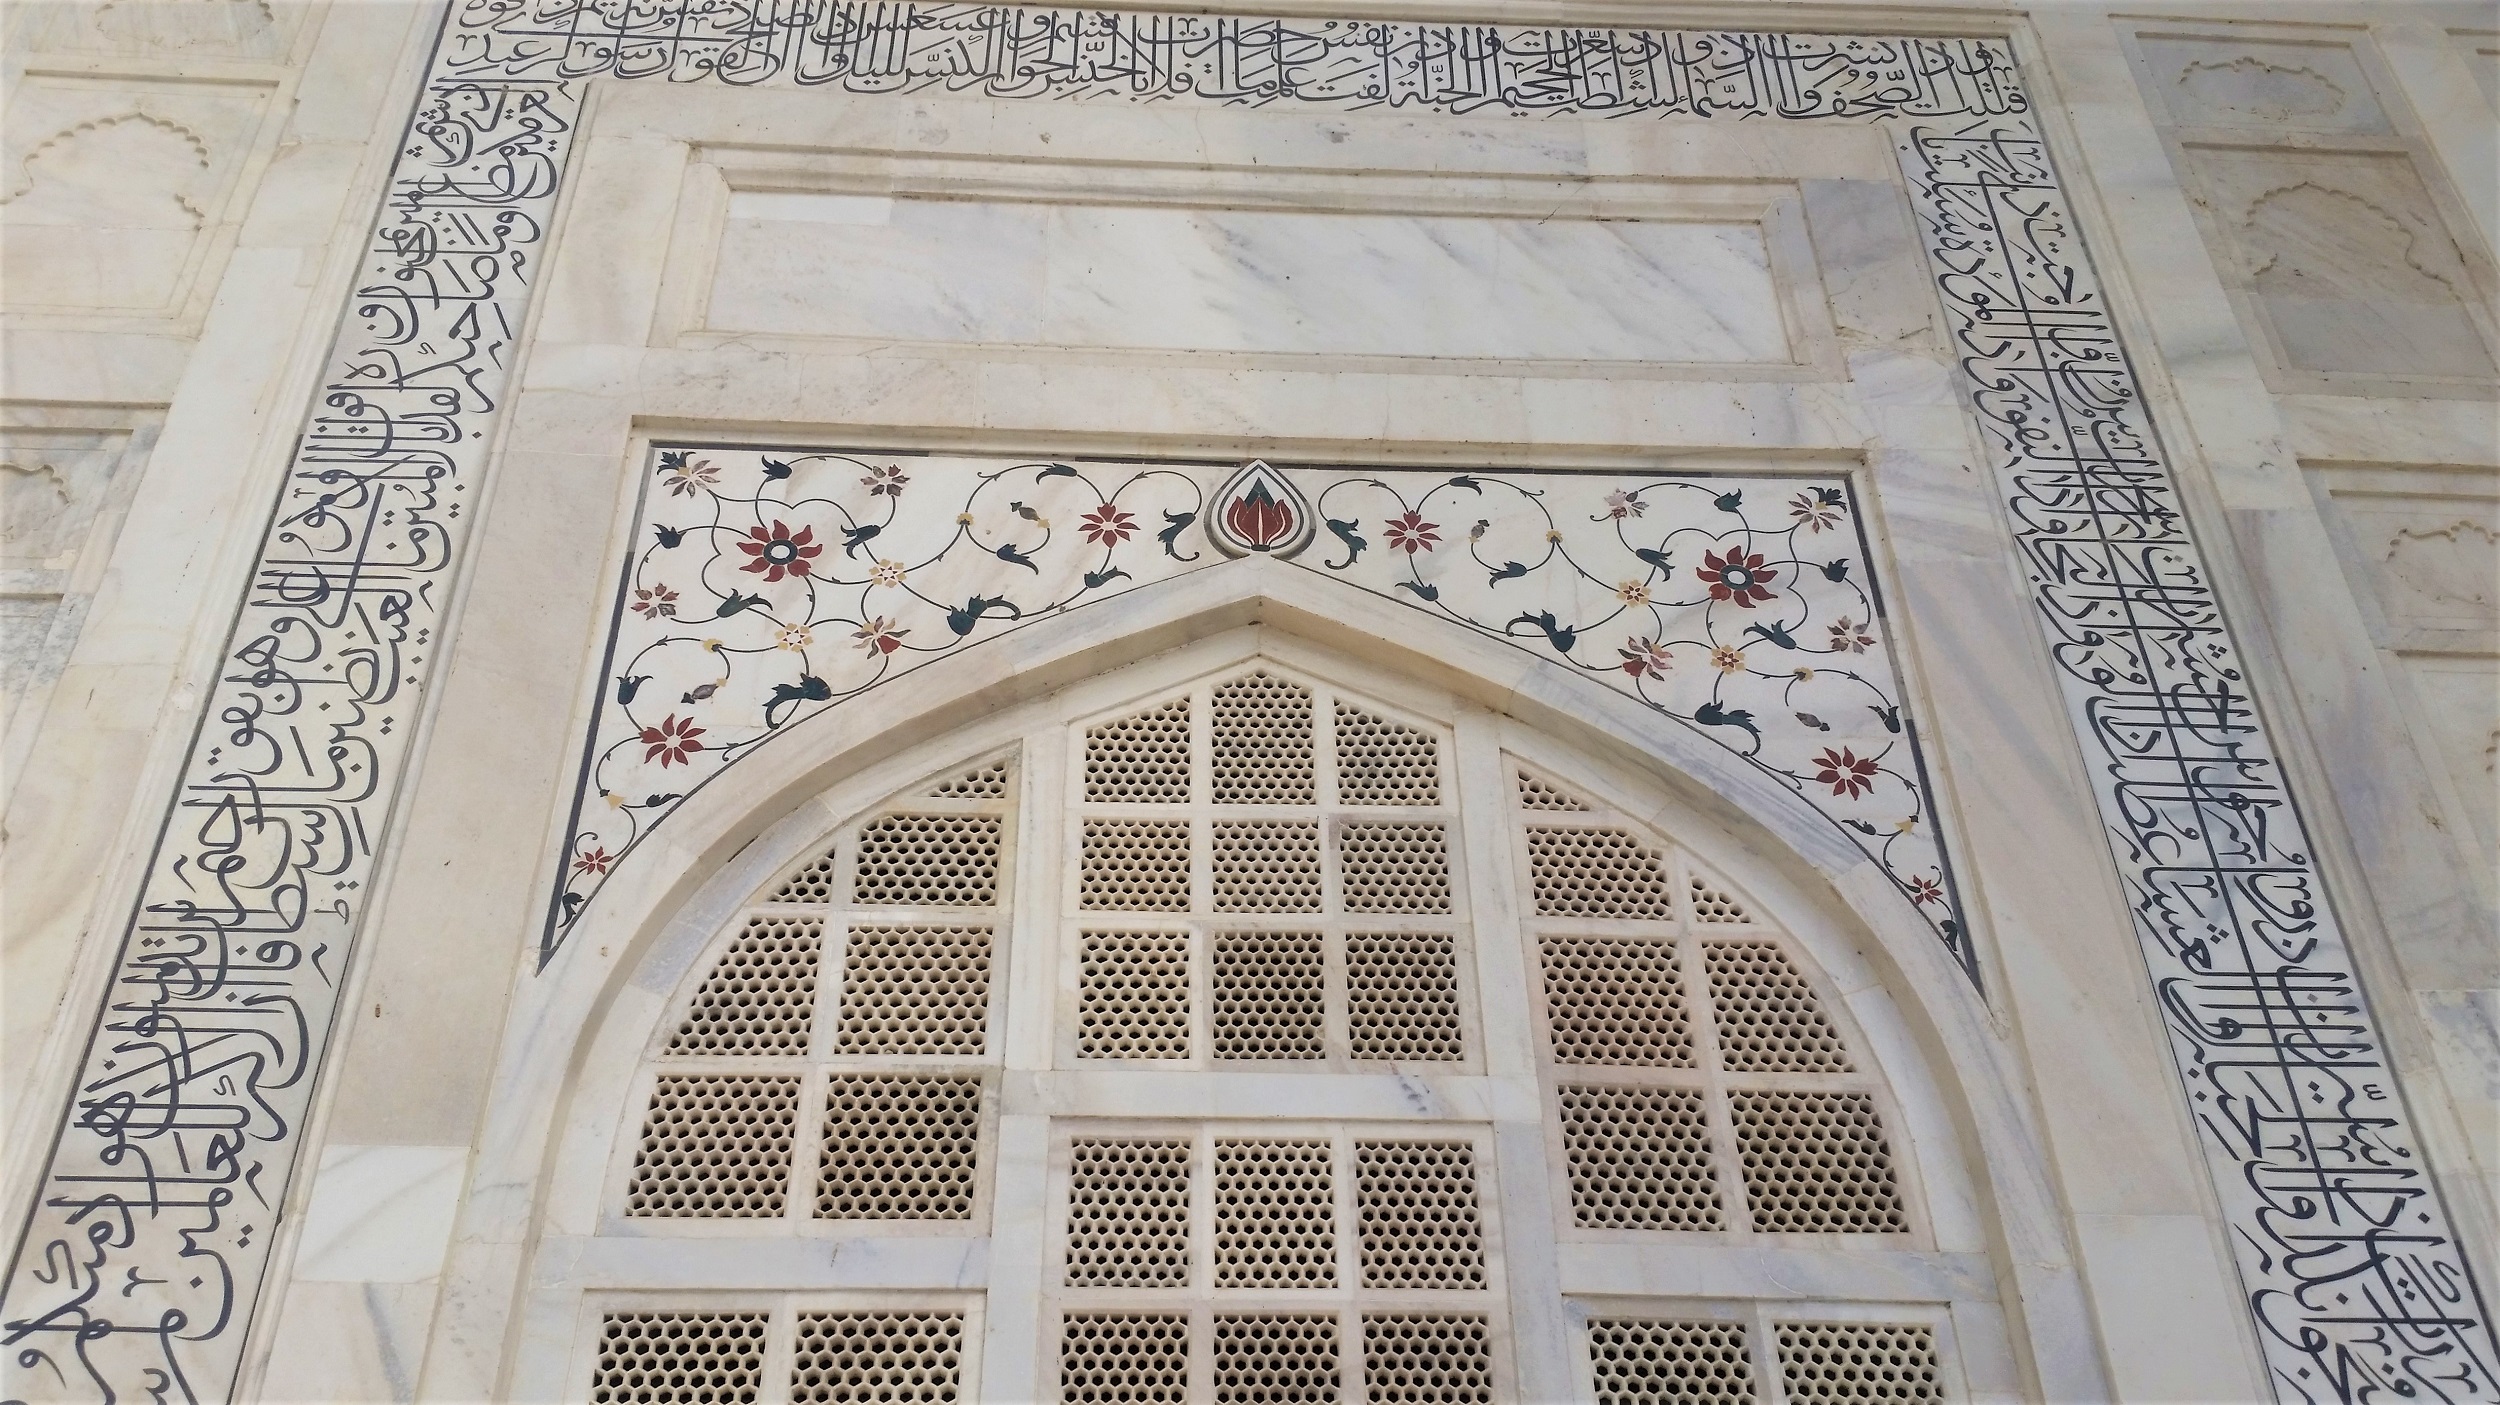 details at the Taj Mahal quotes and extracts from the Quran